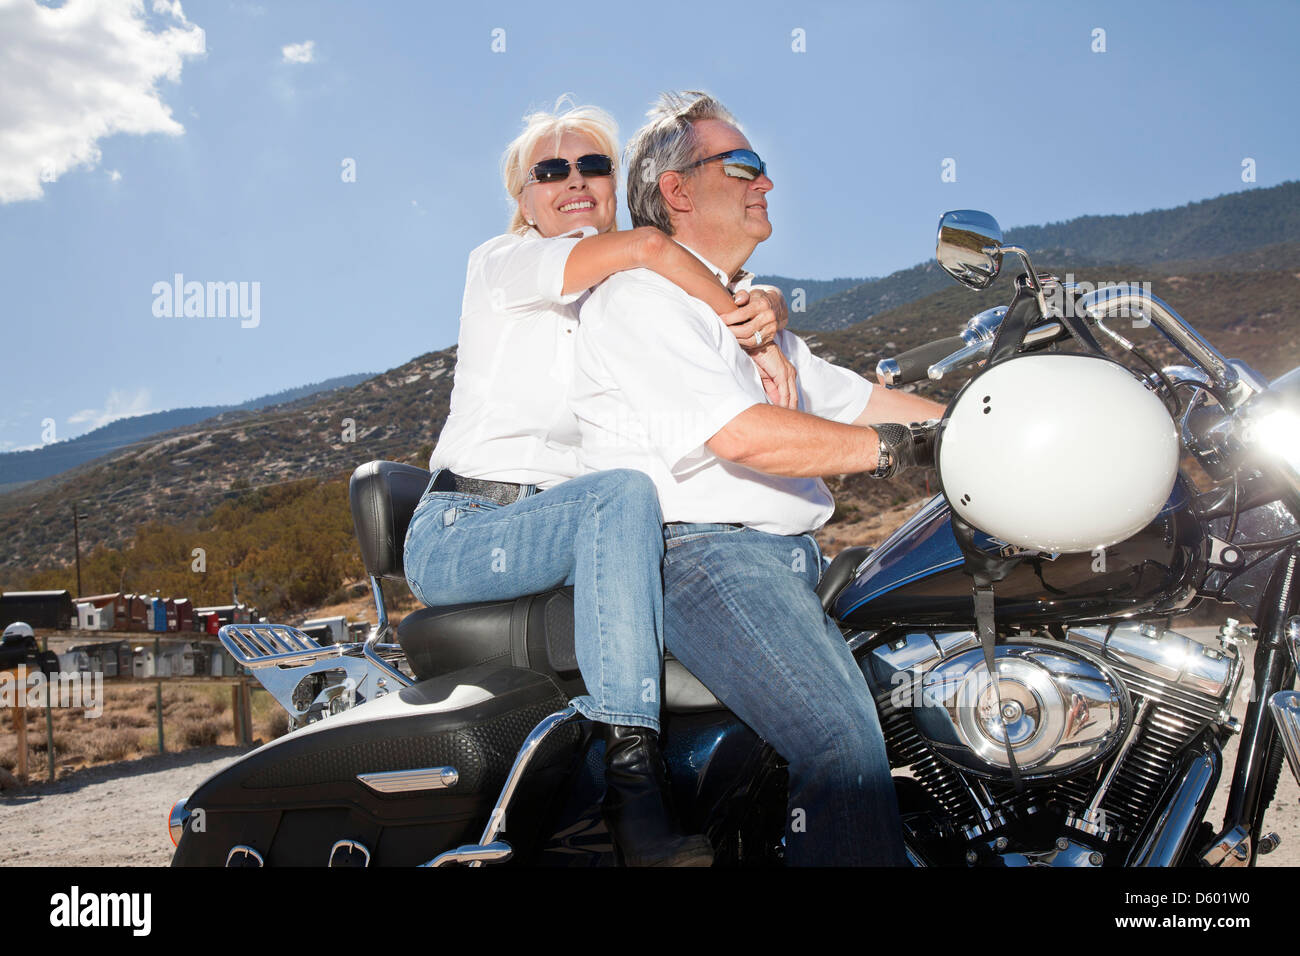 Senior couple riding  motorcycle together in  rural landscape Stock Photo